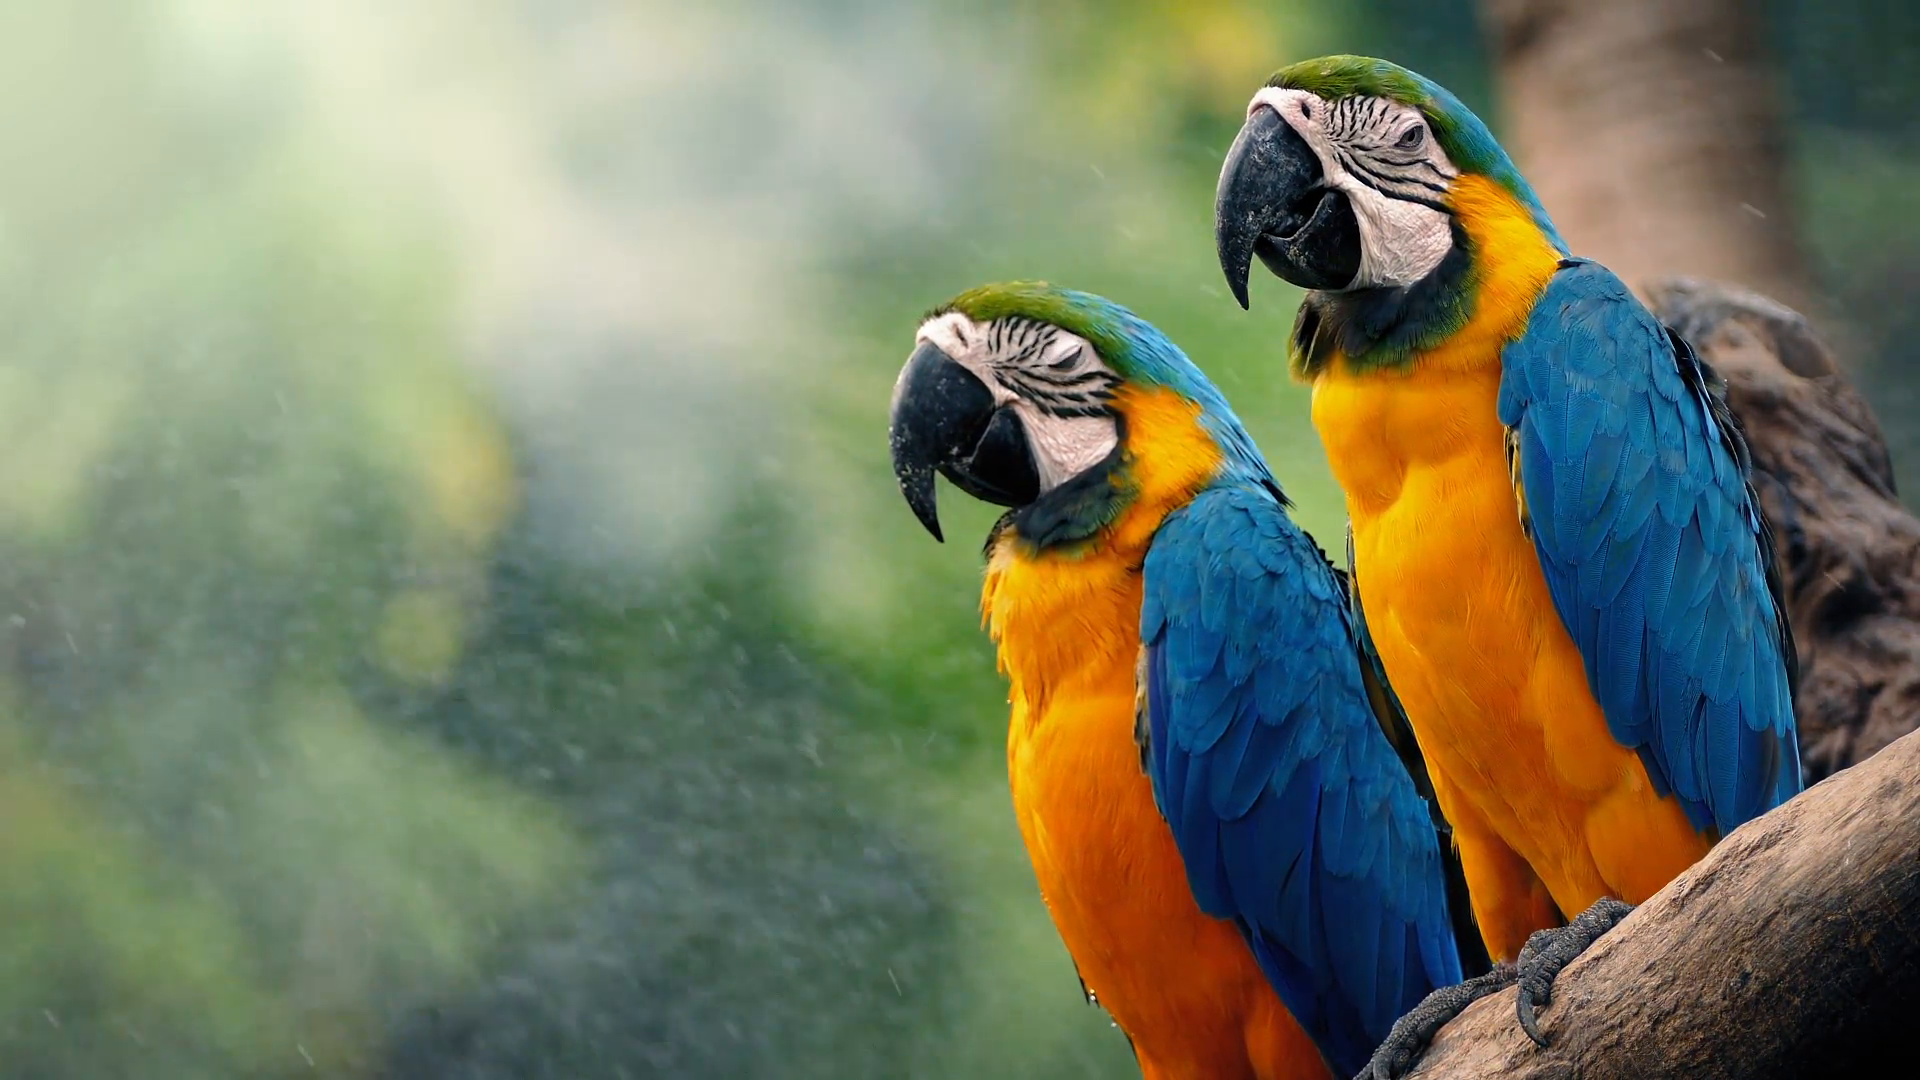 Macaw Parrots On Branch In Tropical Landscape Stock Video Footage ...